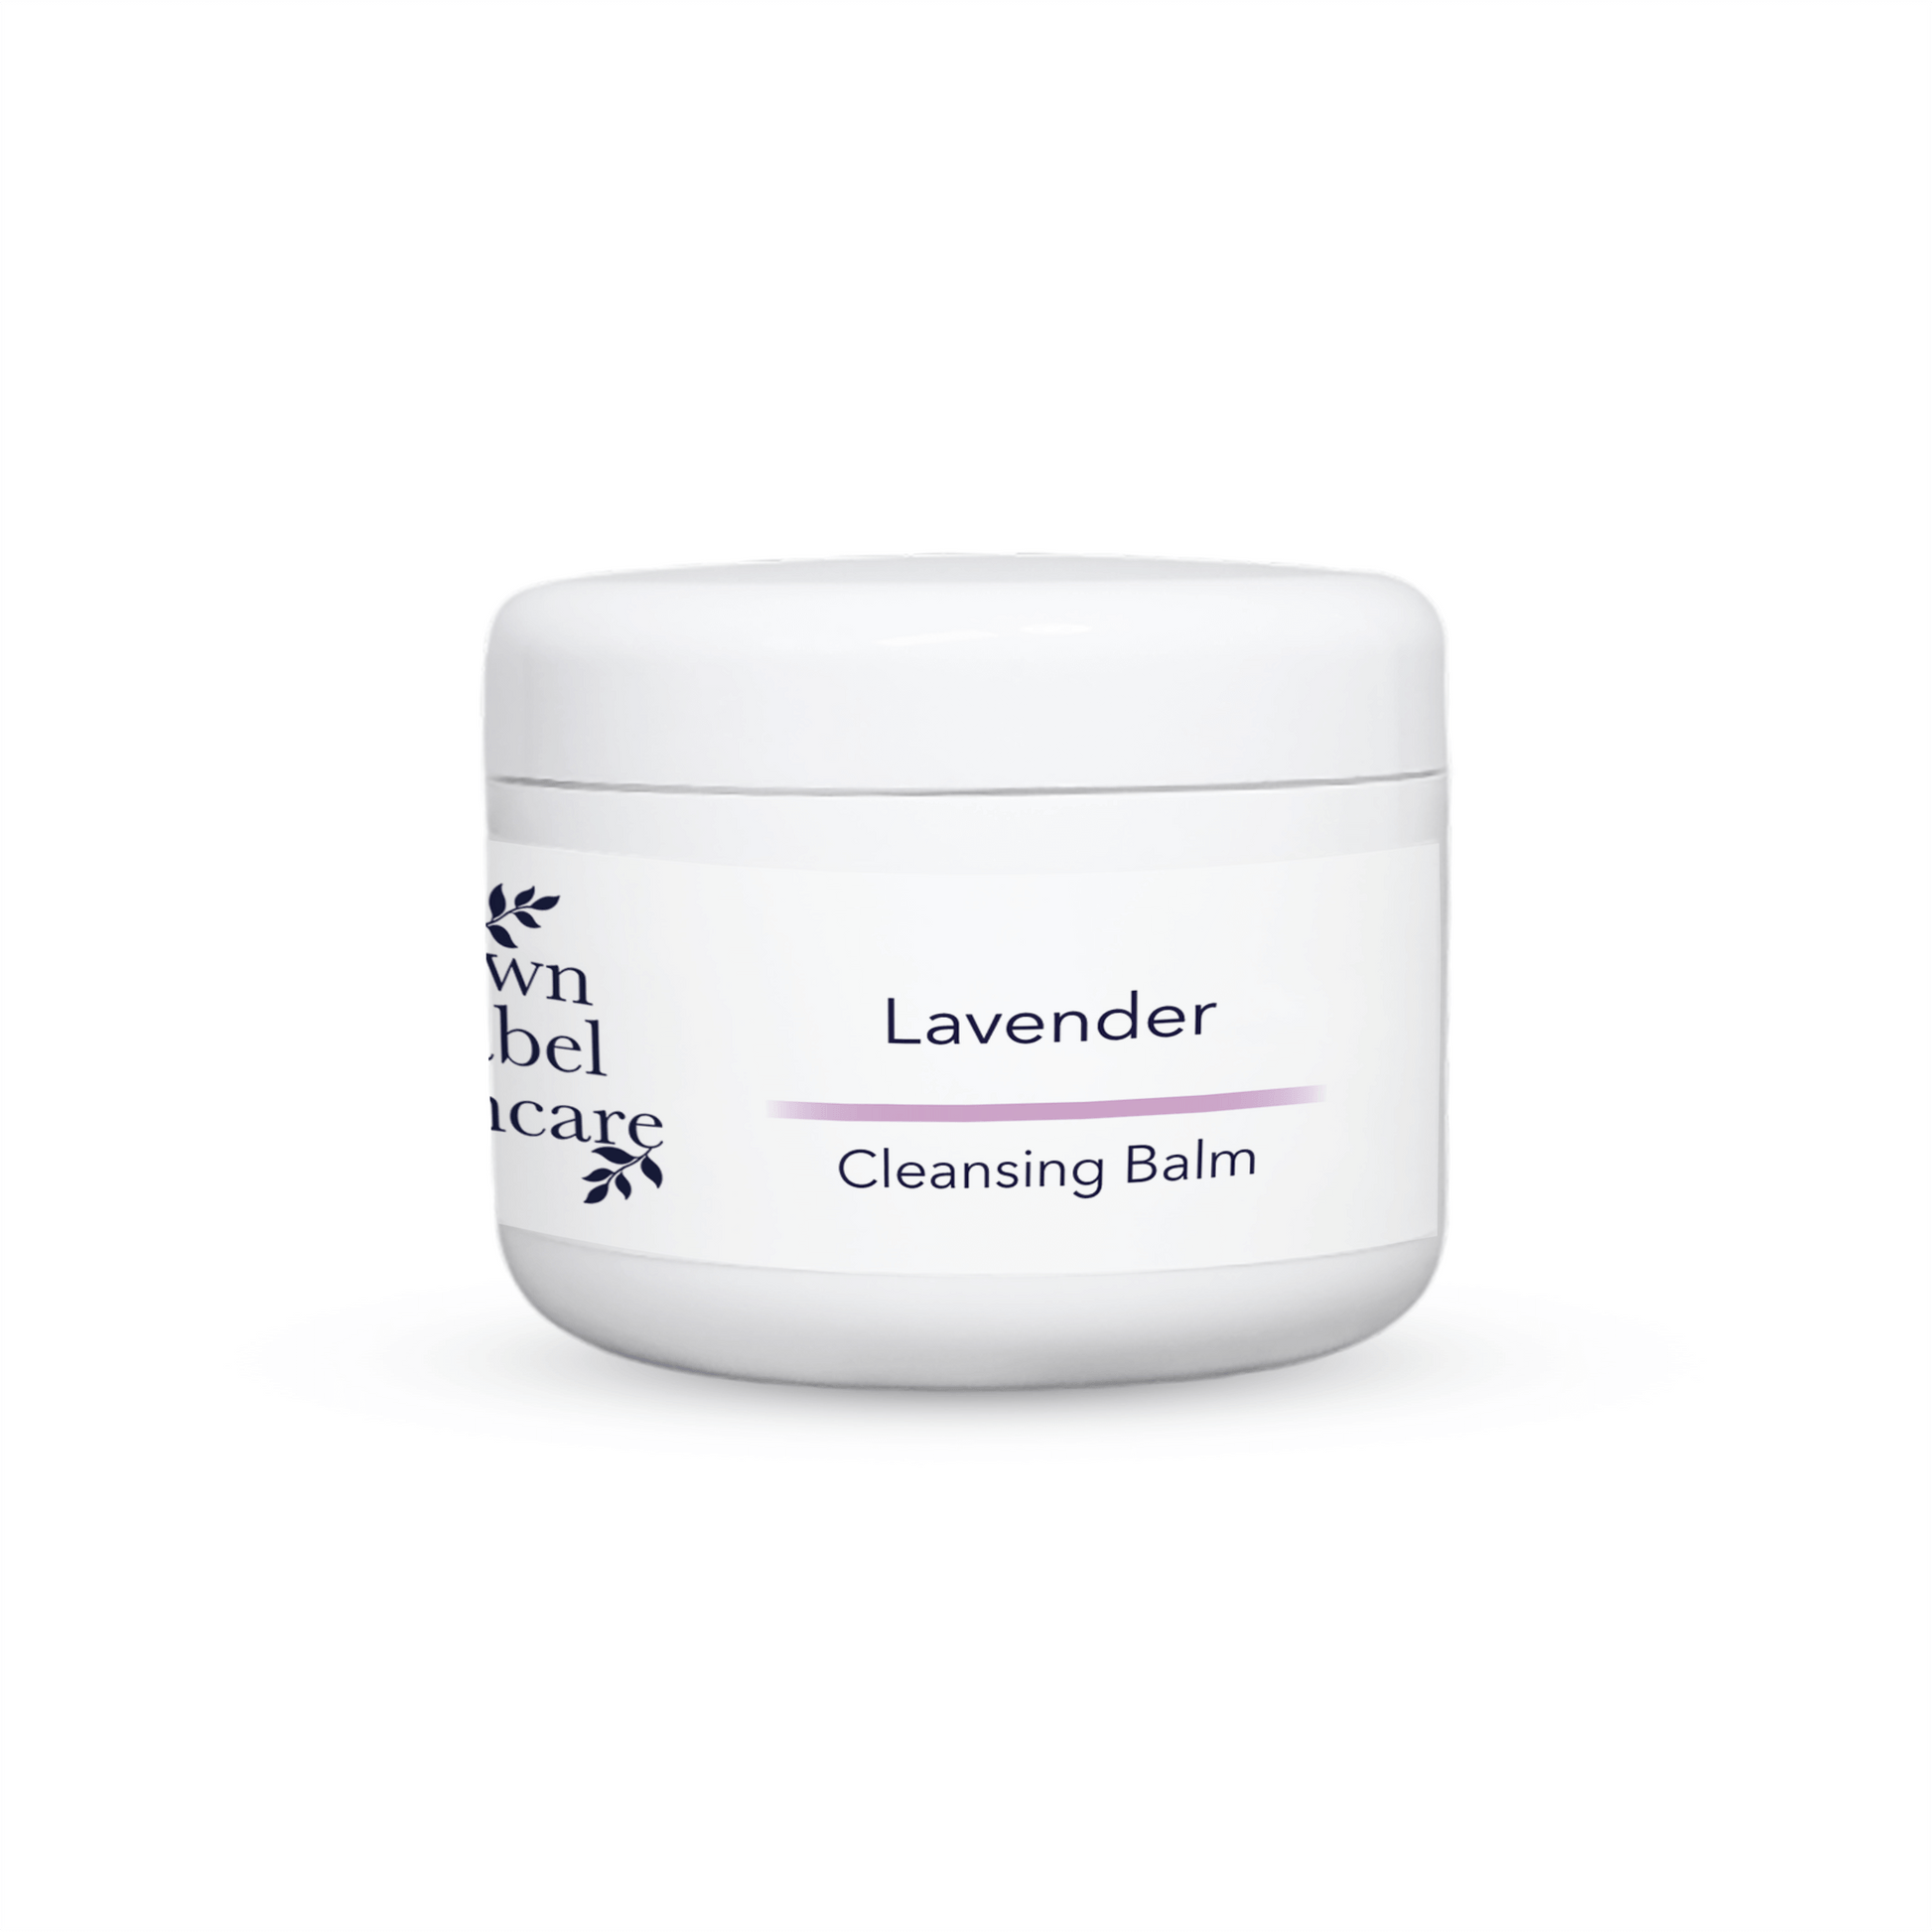 lavender face cleansing balm. cleansing balm in a white jar on a white back drop, vegan facial cleanser balm, facial balm, vegan cleasing balm in private label, white label skincare, own brand skincare balm, 